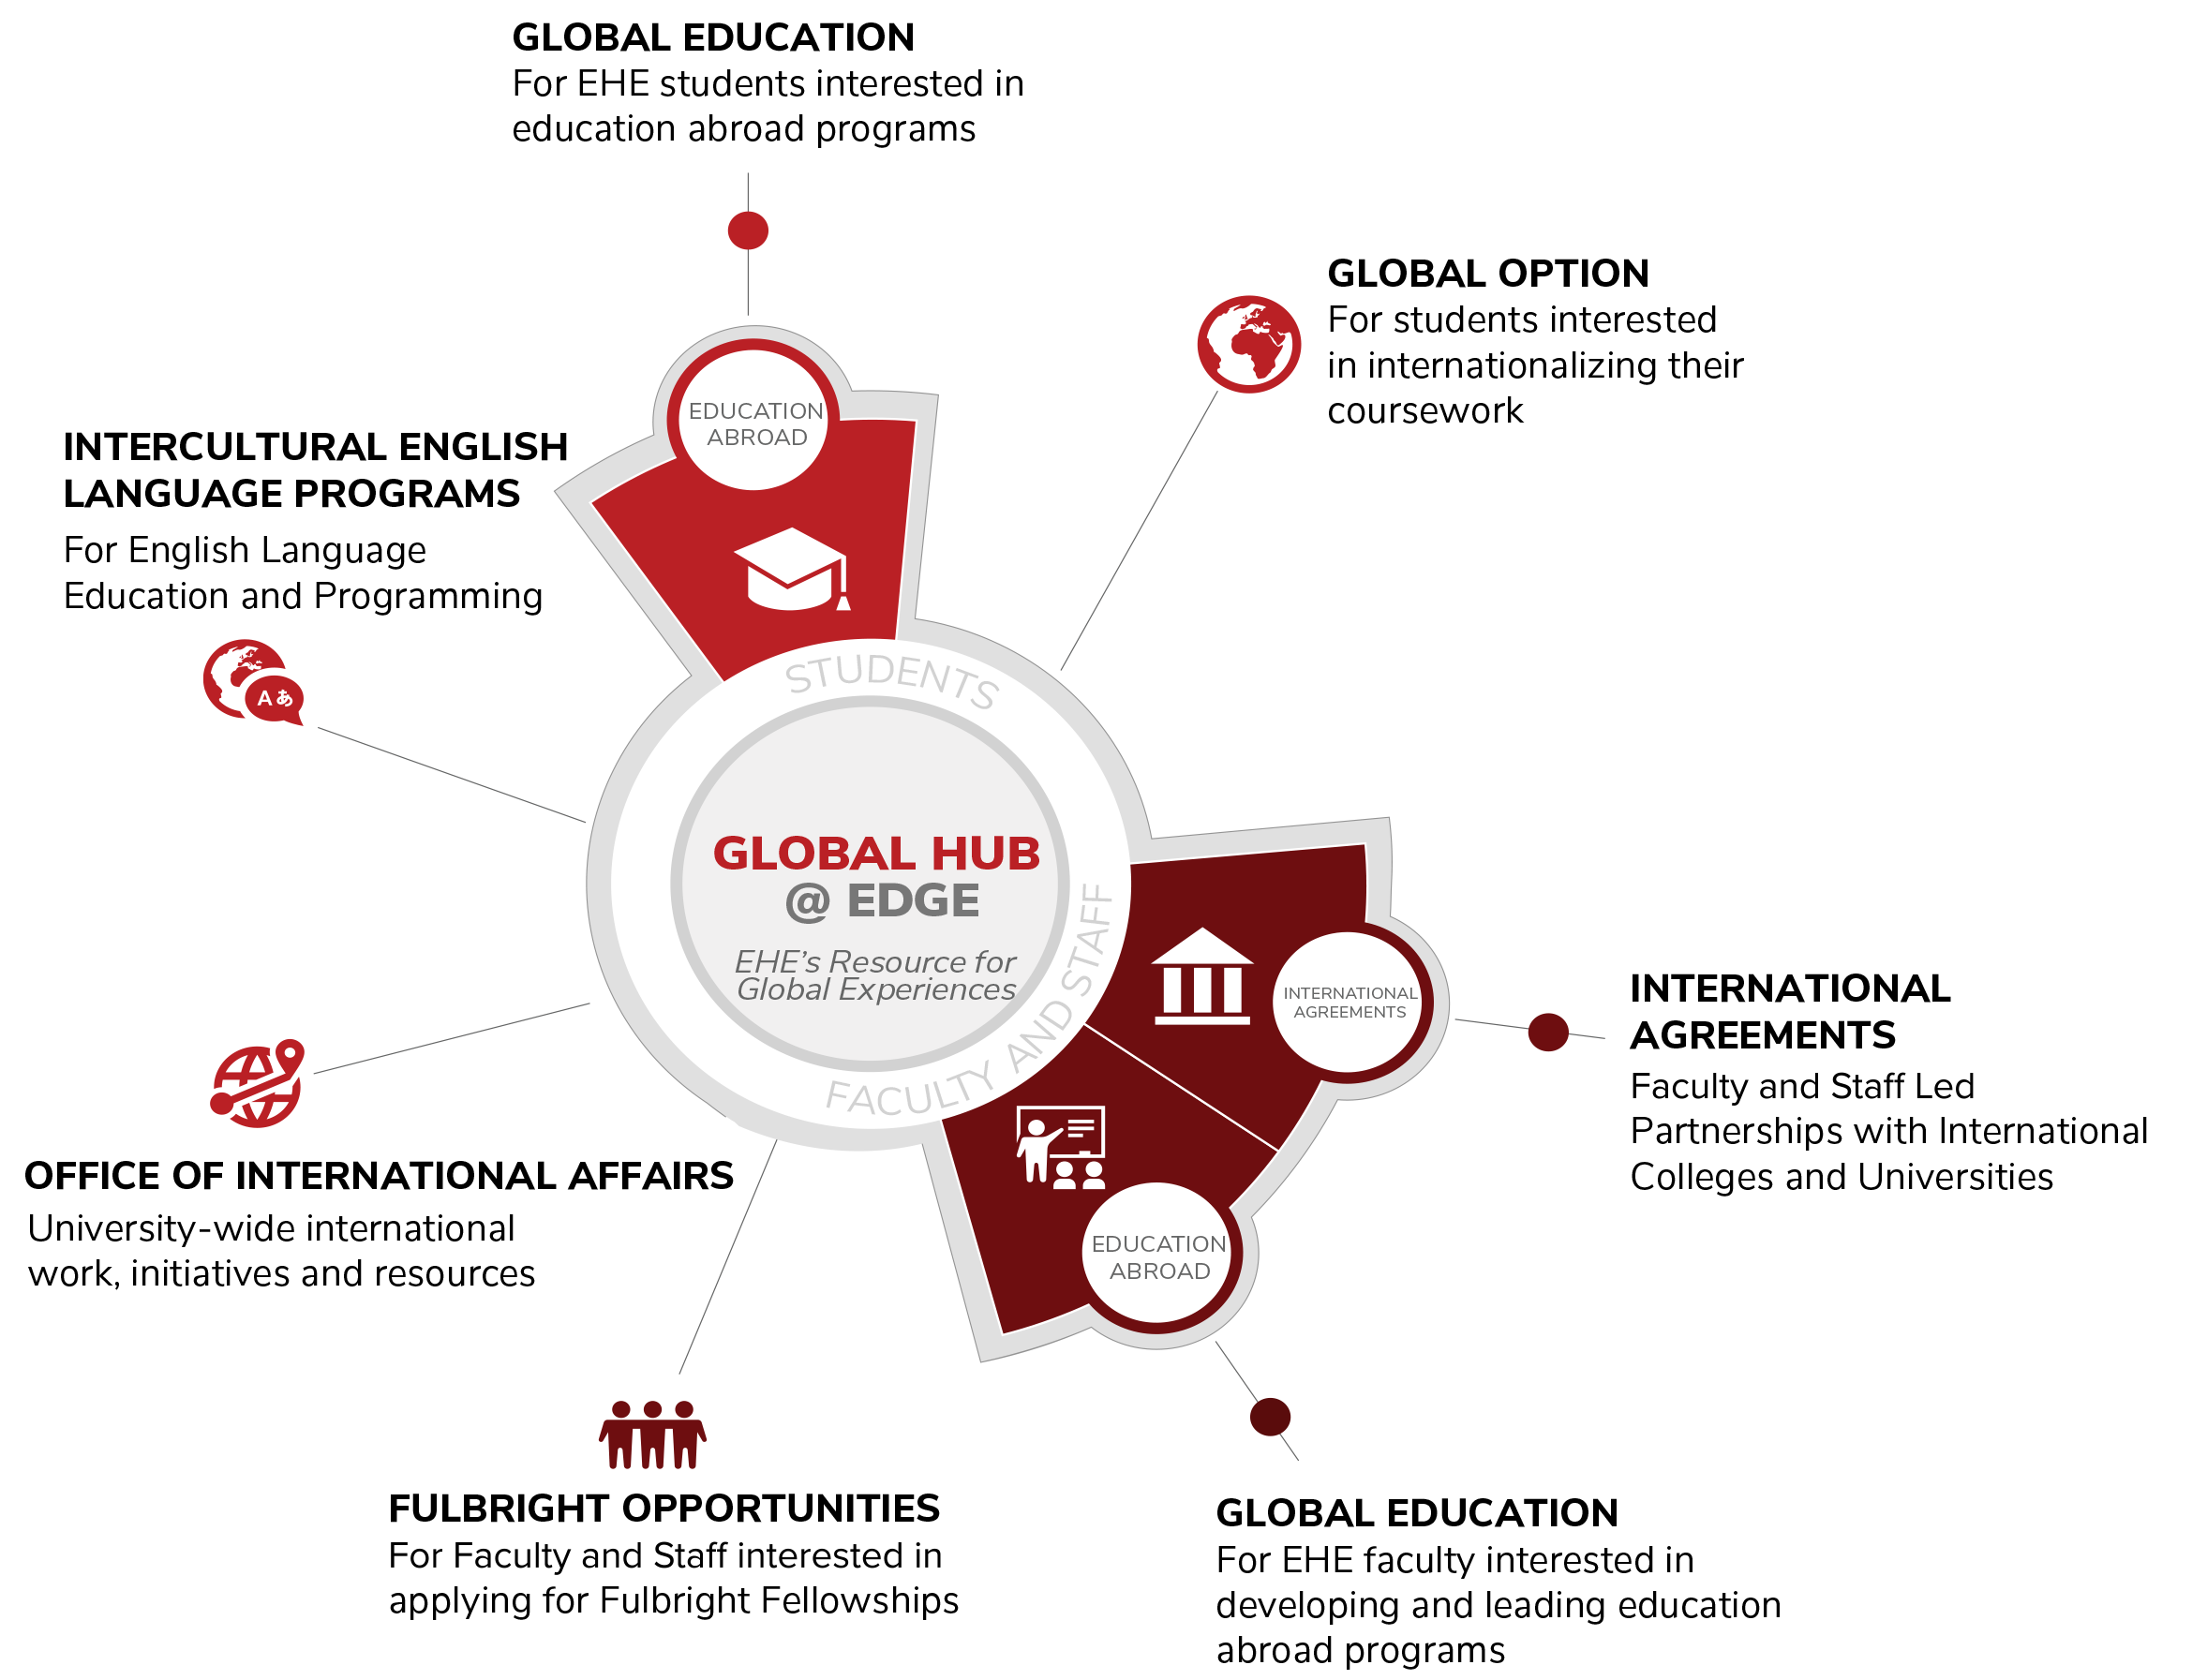 An infographic explaining the Global Hub. Center says "Global Hub @ EDGE: EHE's Resource for Global Experiences" Categories include: "Education Abroad" , "Global Option", "International Agreements", "Global Education", "Fulbright Opportunities", "Office of International Affairs", “Intercultural English Language Programs”. Global Education is for EHE students interested in education abroad programs, Global Option is for students interested in internationalizing their coursework, International Agreements are Faculty and Staff Led Partnerships with International Colleges and Universities, Global Education under Faculty and Staff is for EHE faculty interested in developing and leading education abroad programs, Fulbright Opportunities are for faculty and staff interested in applying for Fulbright Fellowships, Office of International Affairs is a University-wide international work initiatives and resources, Intercultural English Language Programs are for English language Education and Programming.